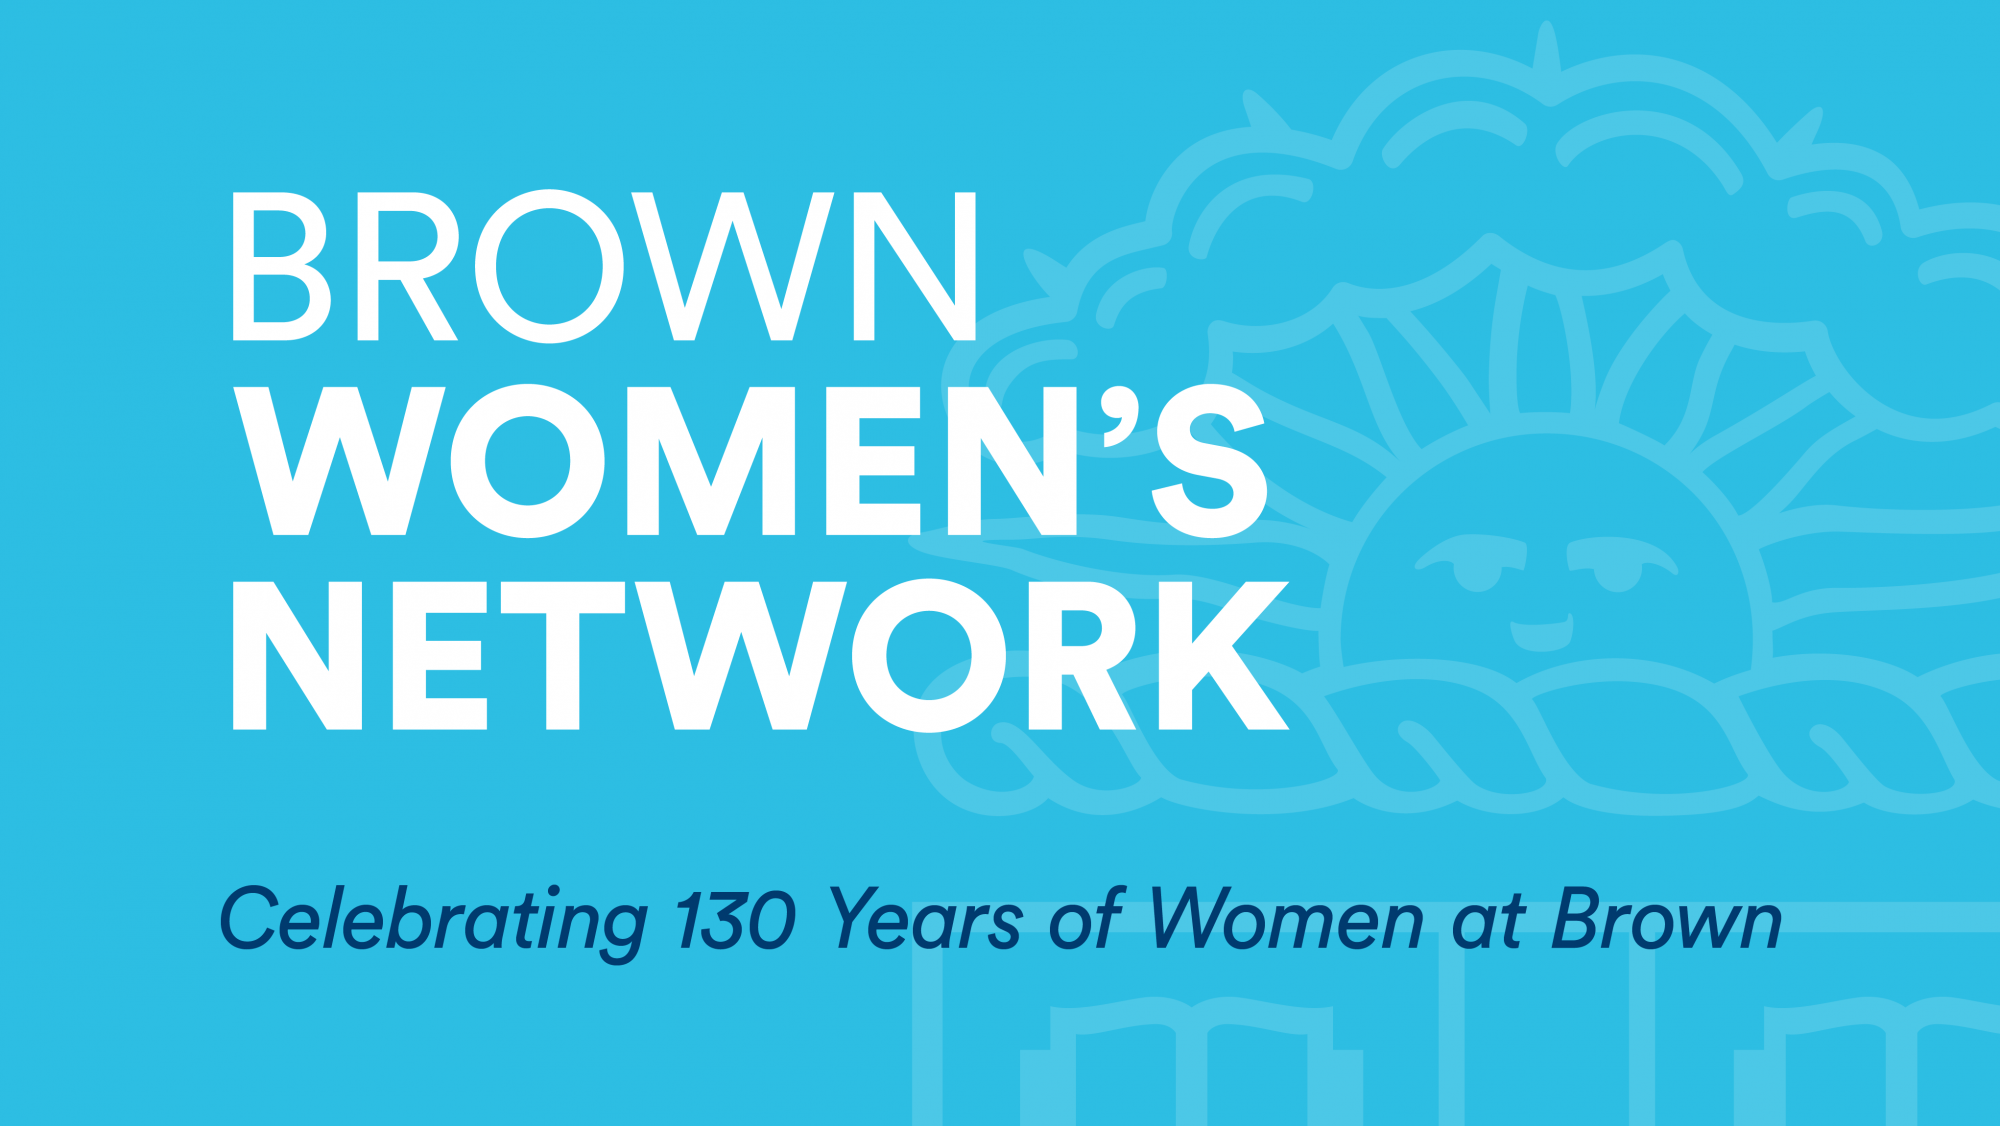 Brown Women's Network image with 130th logo